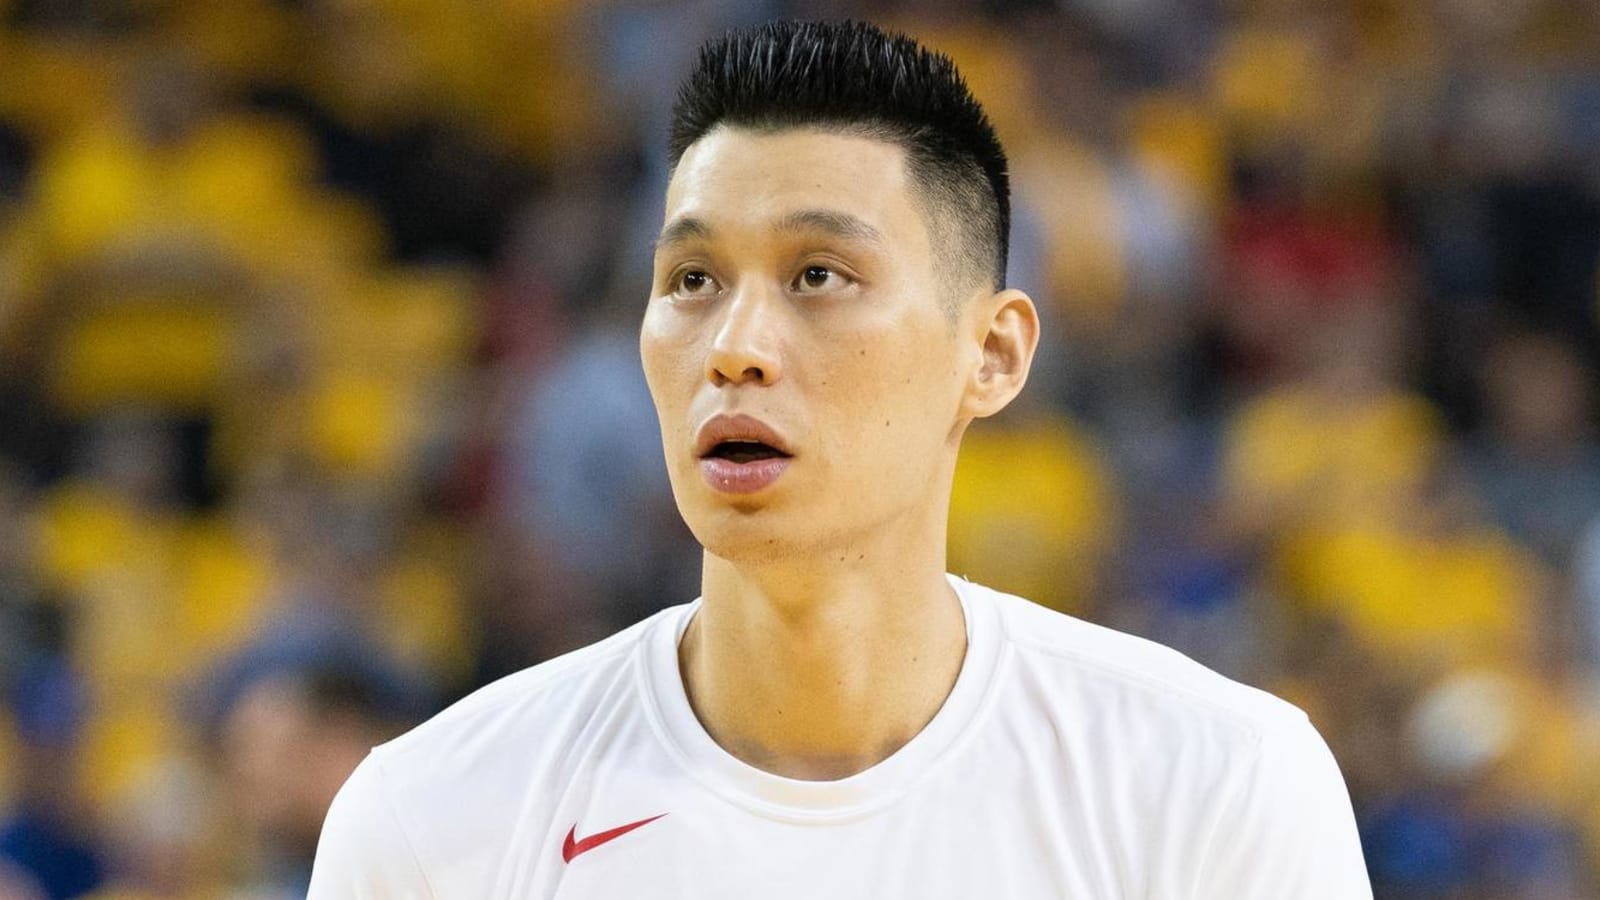 Pickup game with Curry fuels Lin NBA return buzz